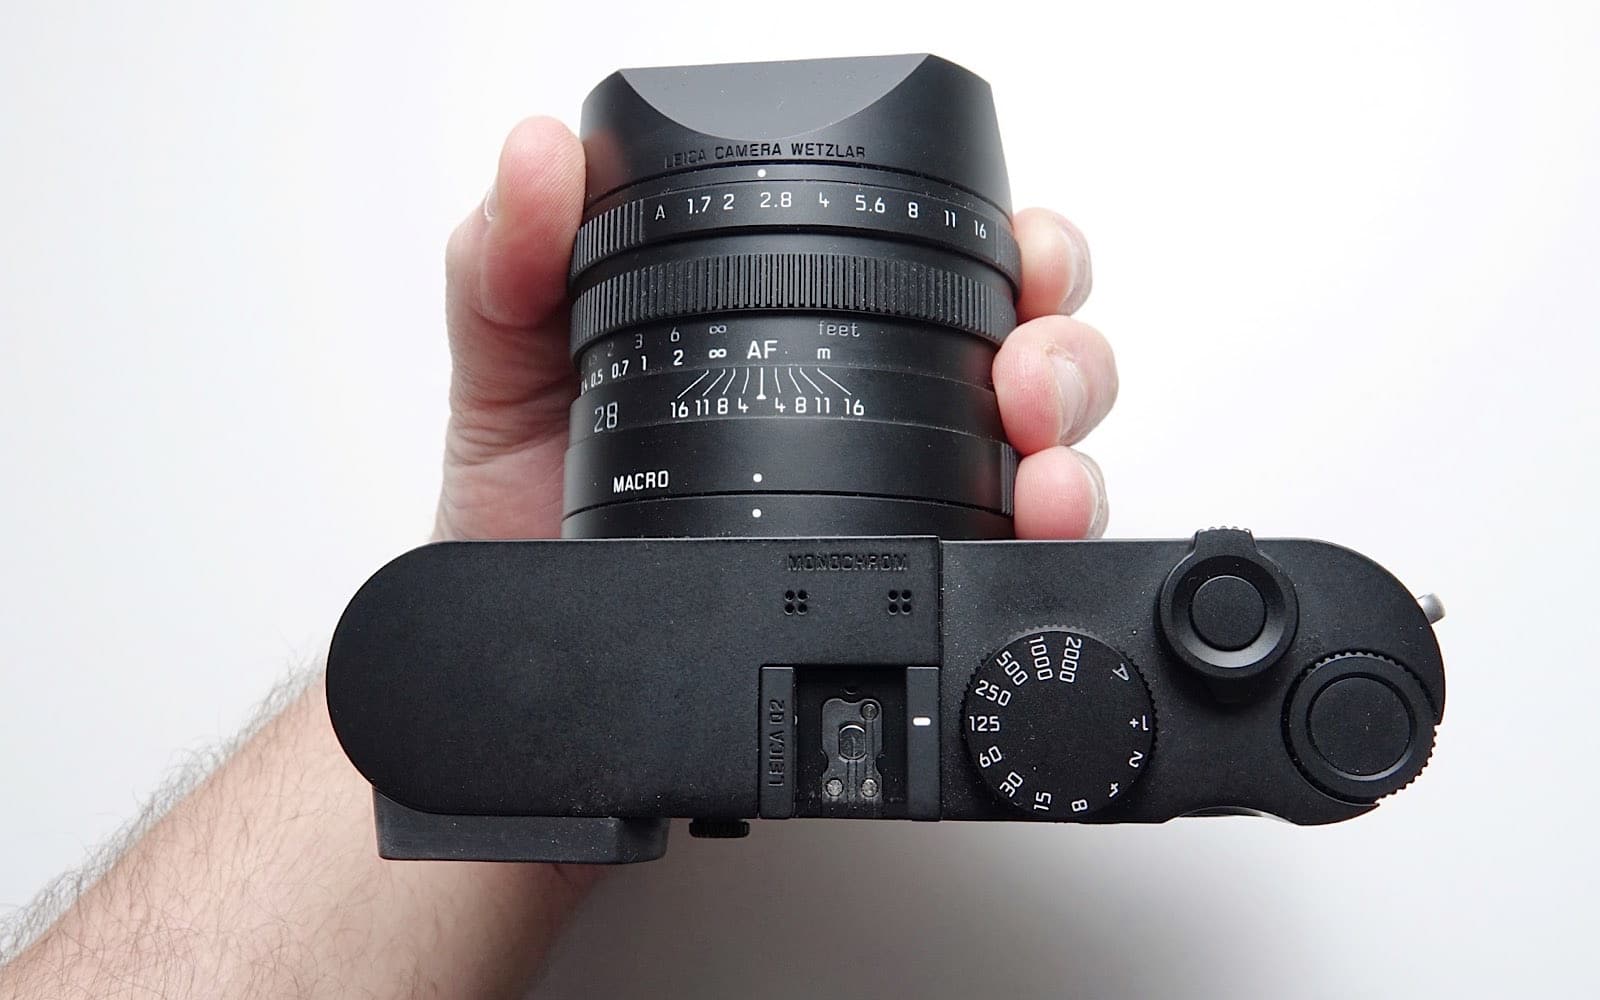 You can hold the Leica Q2 Monochrom like any other good camera.